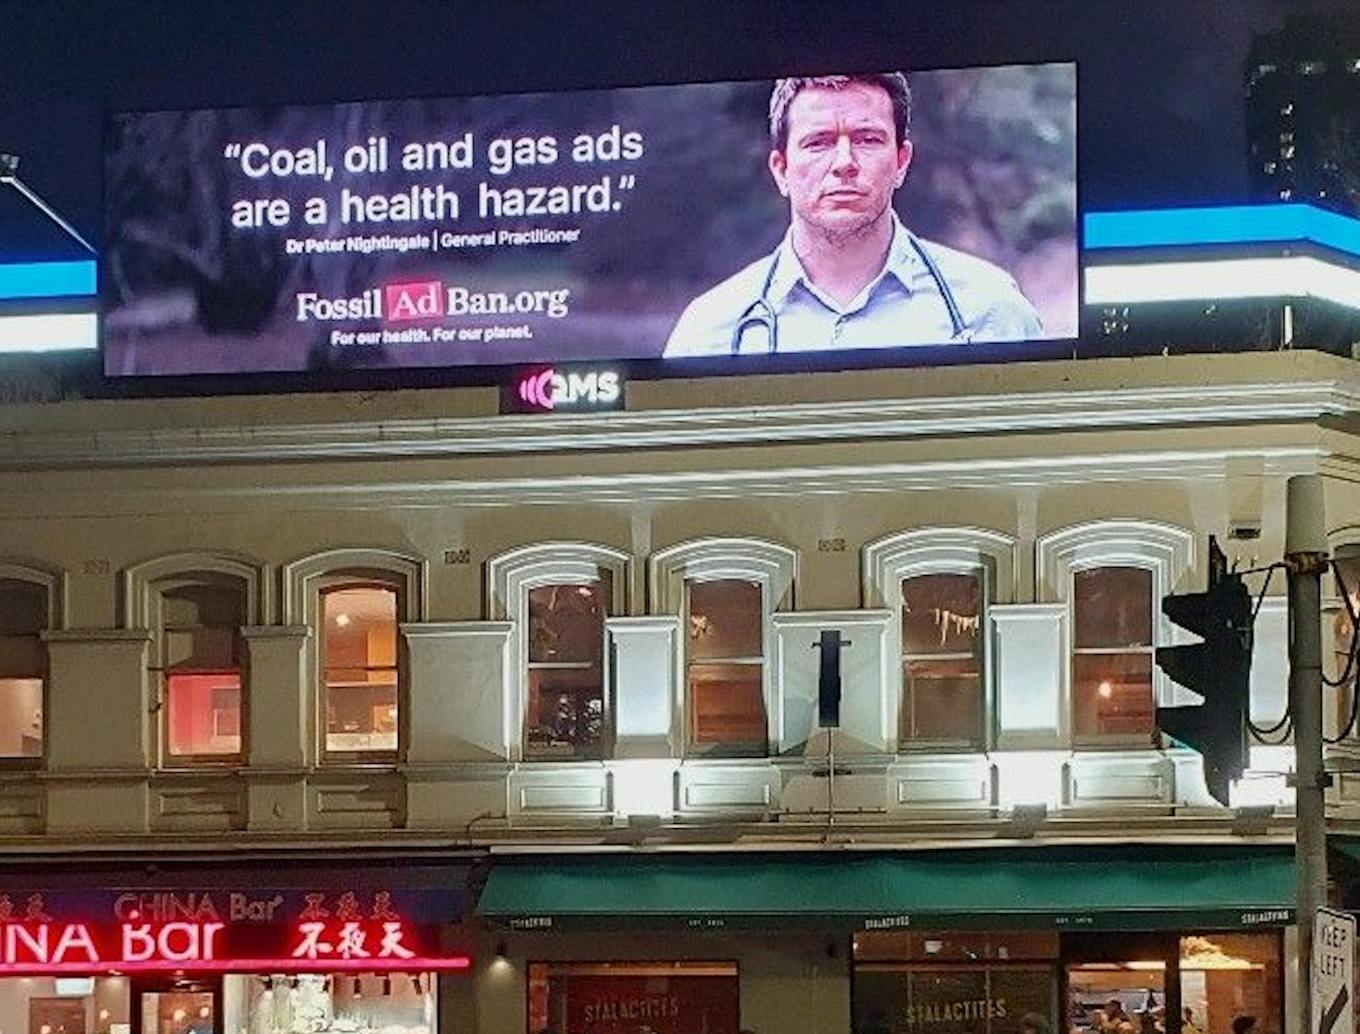 A billboard in Melbourne's central business district calling for fossil fuel ad ban